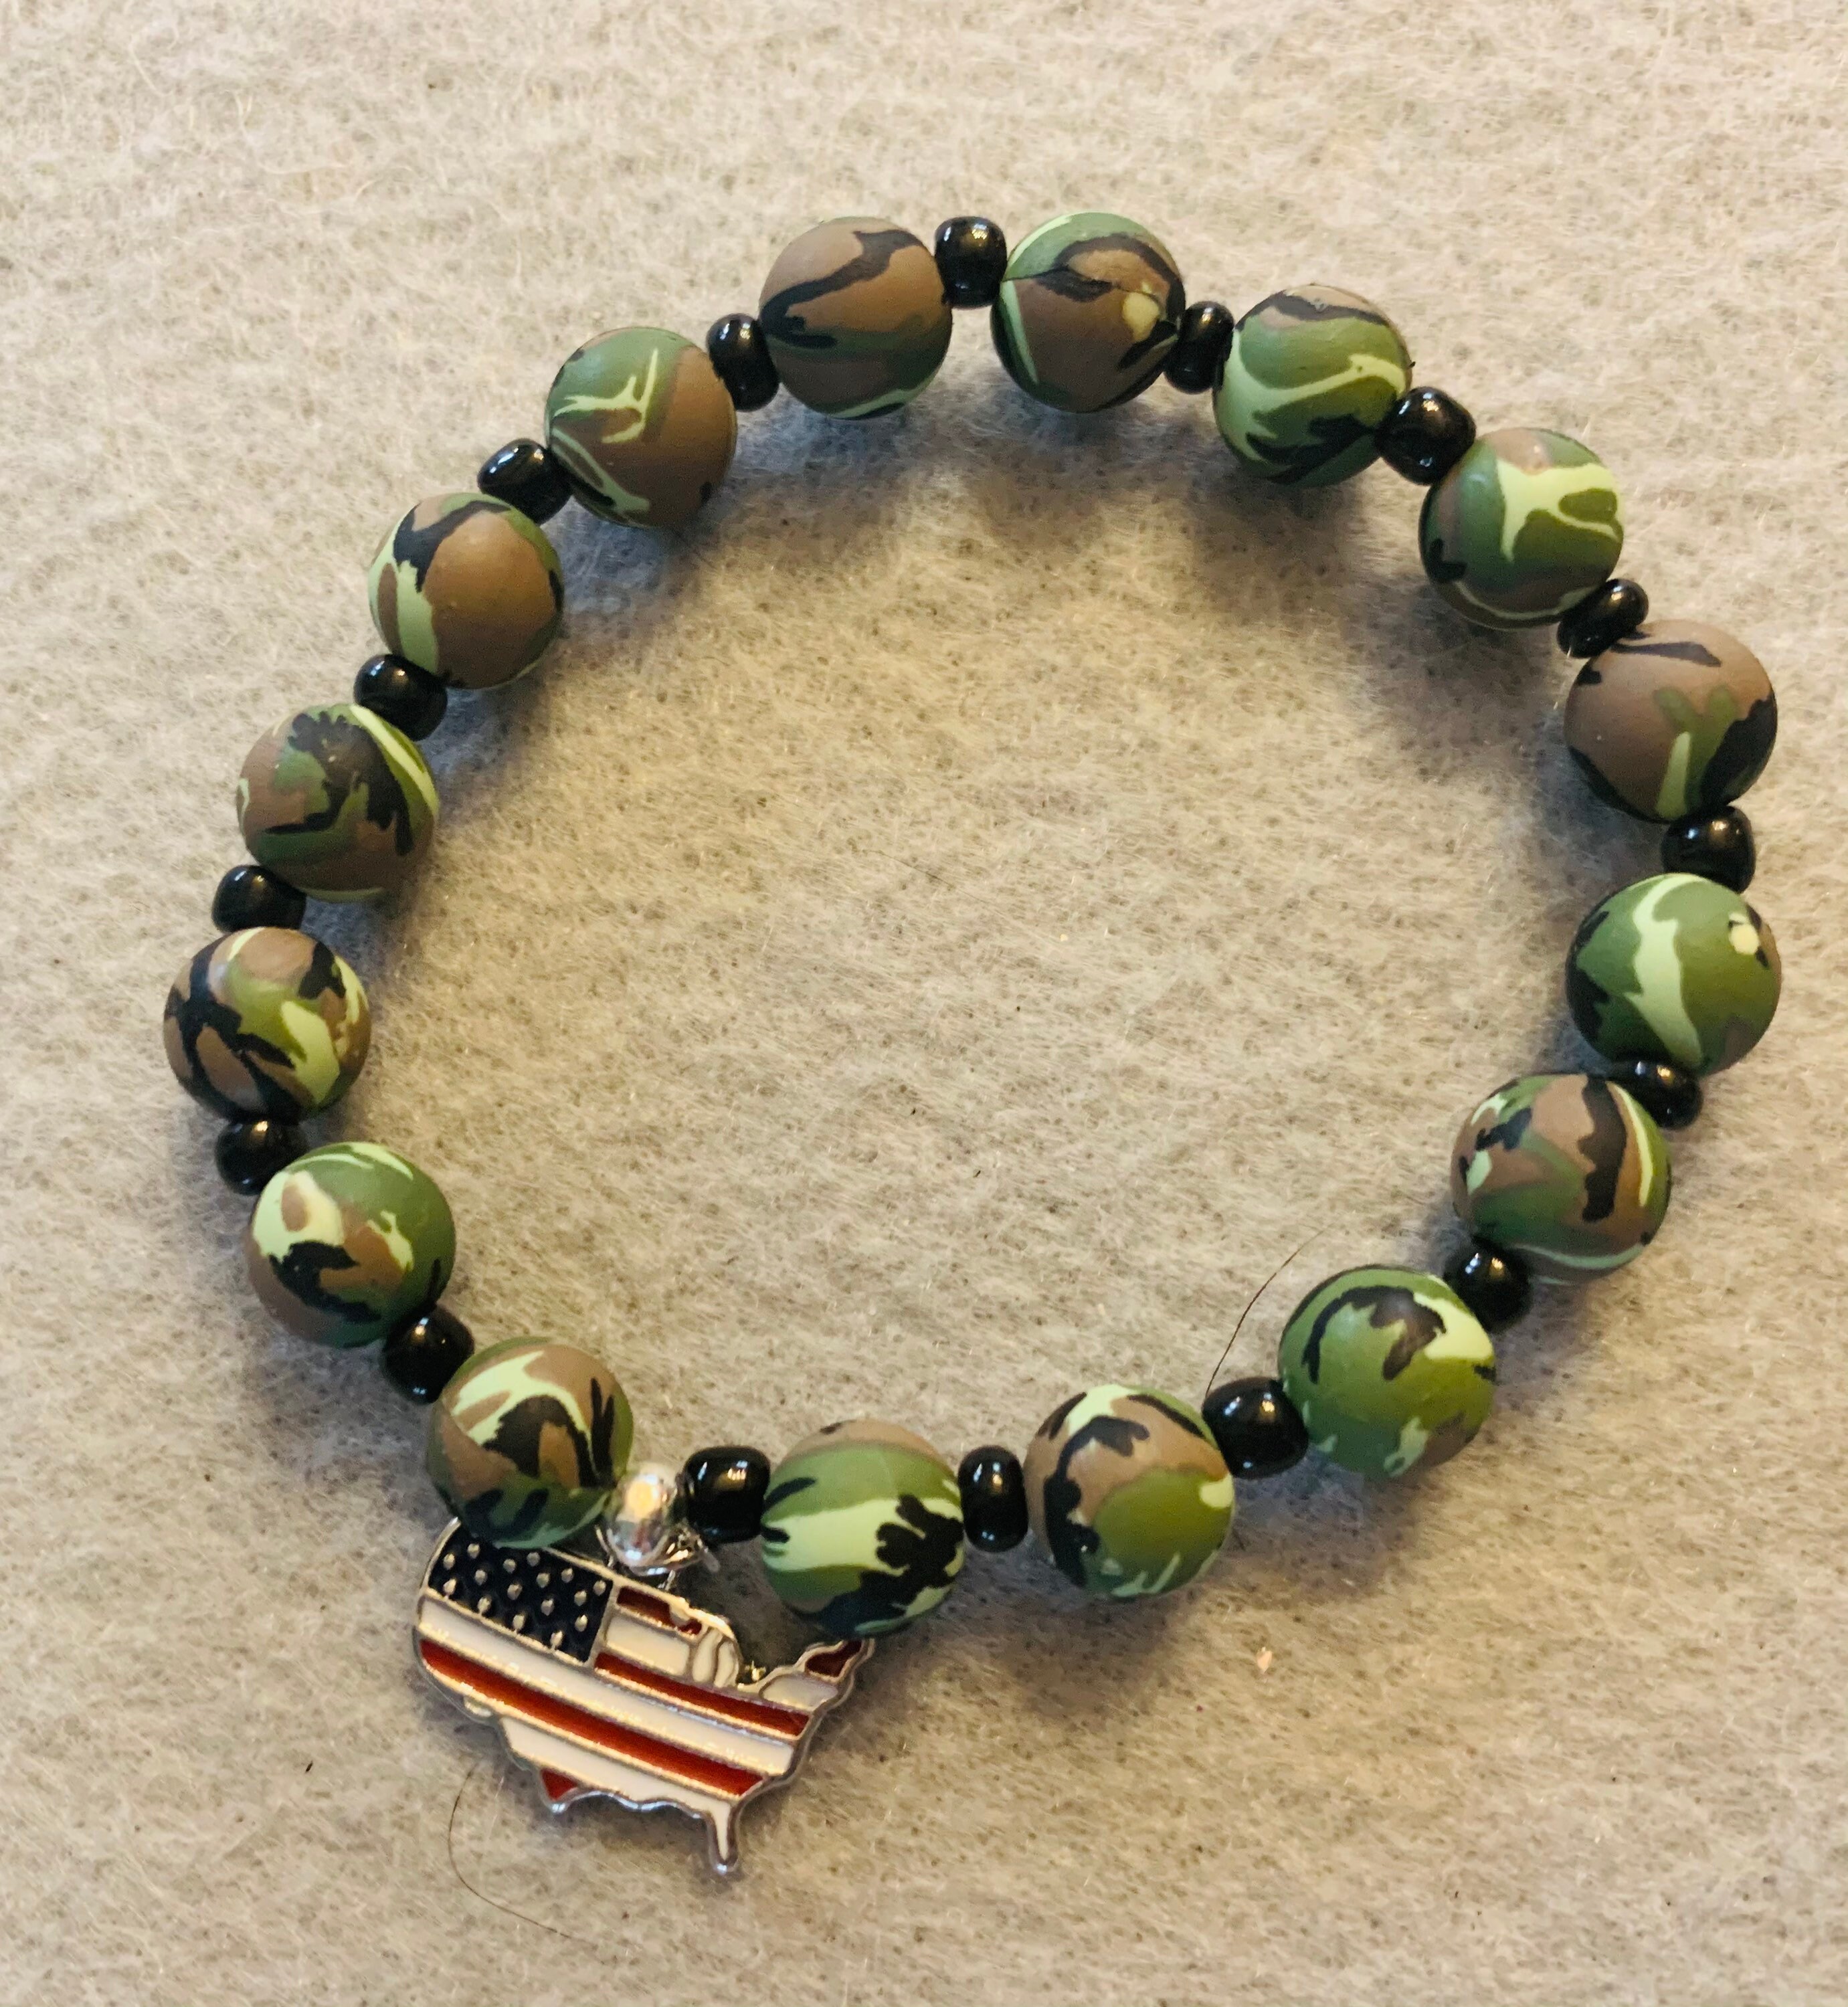 Desert Foliage Camouflage Paracord Bracelet That Will Help Others Who Are  In Need